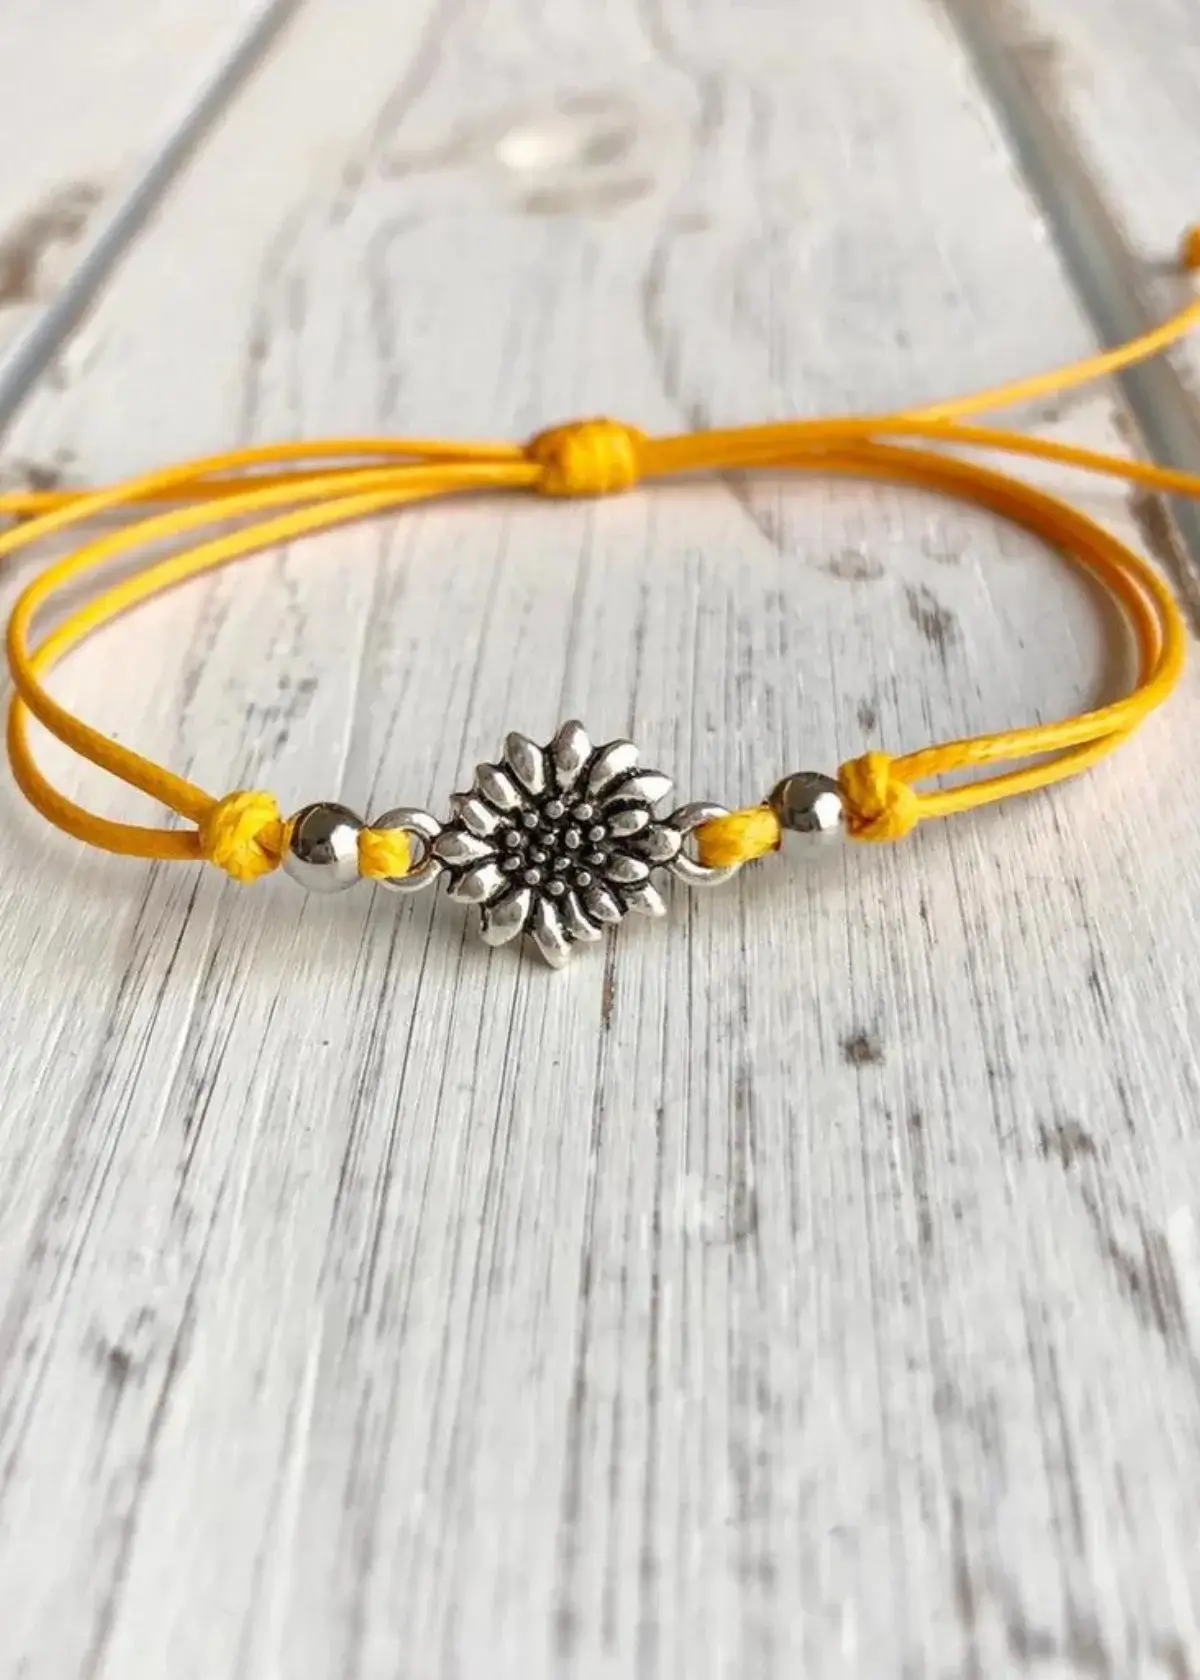 Can a sunflower bracelet be adjusted if it doesn't fit correctly?